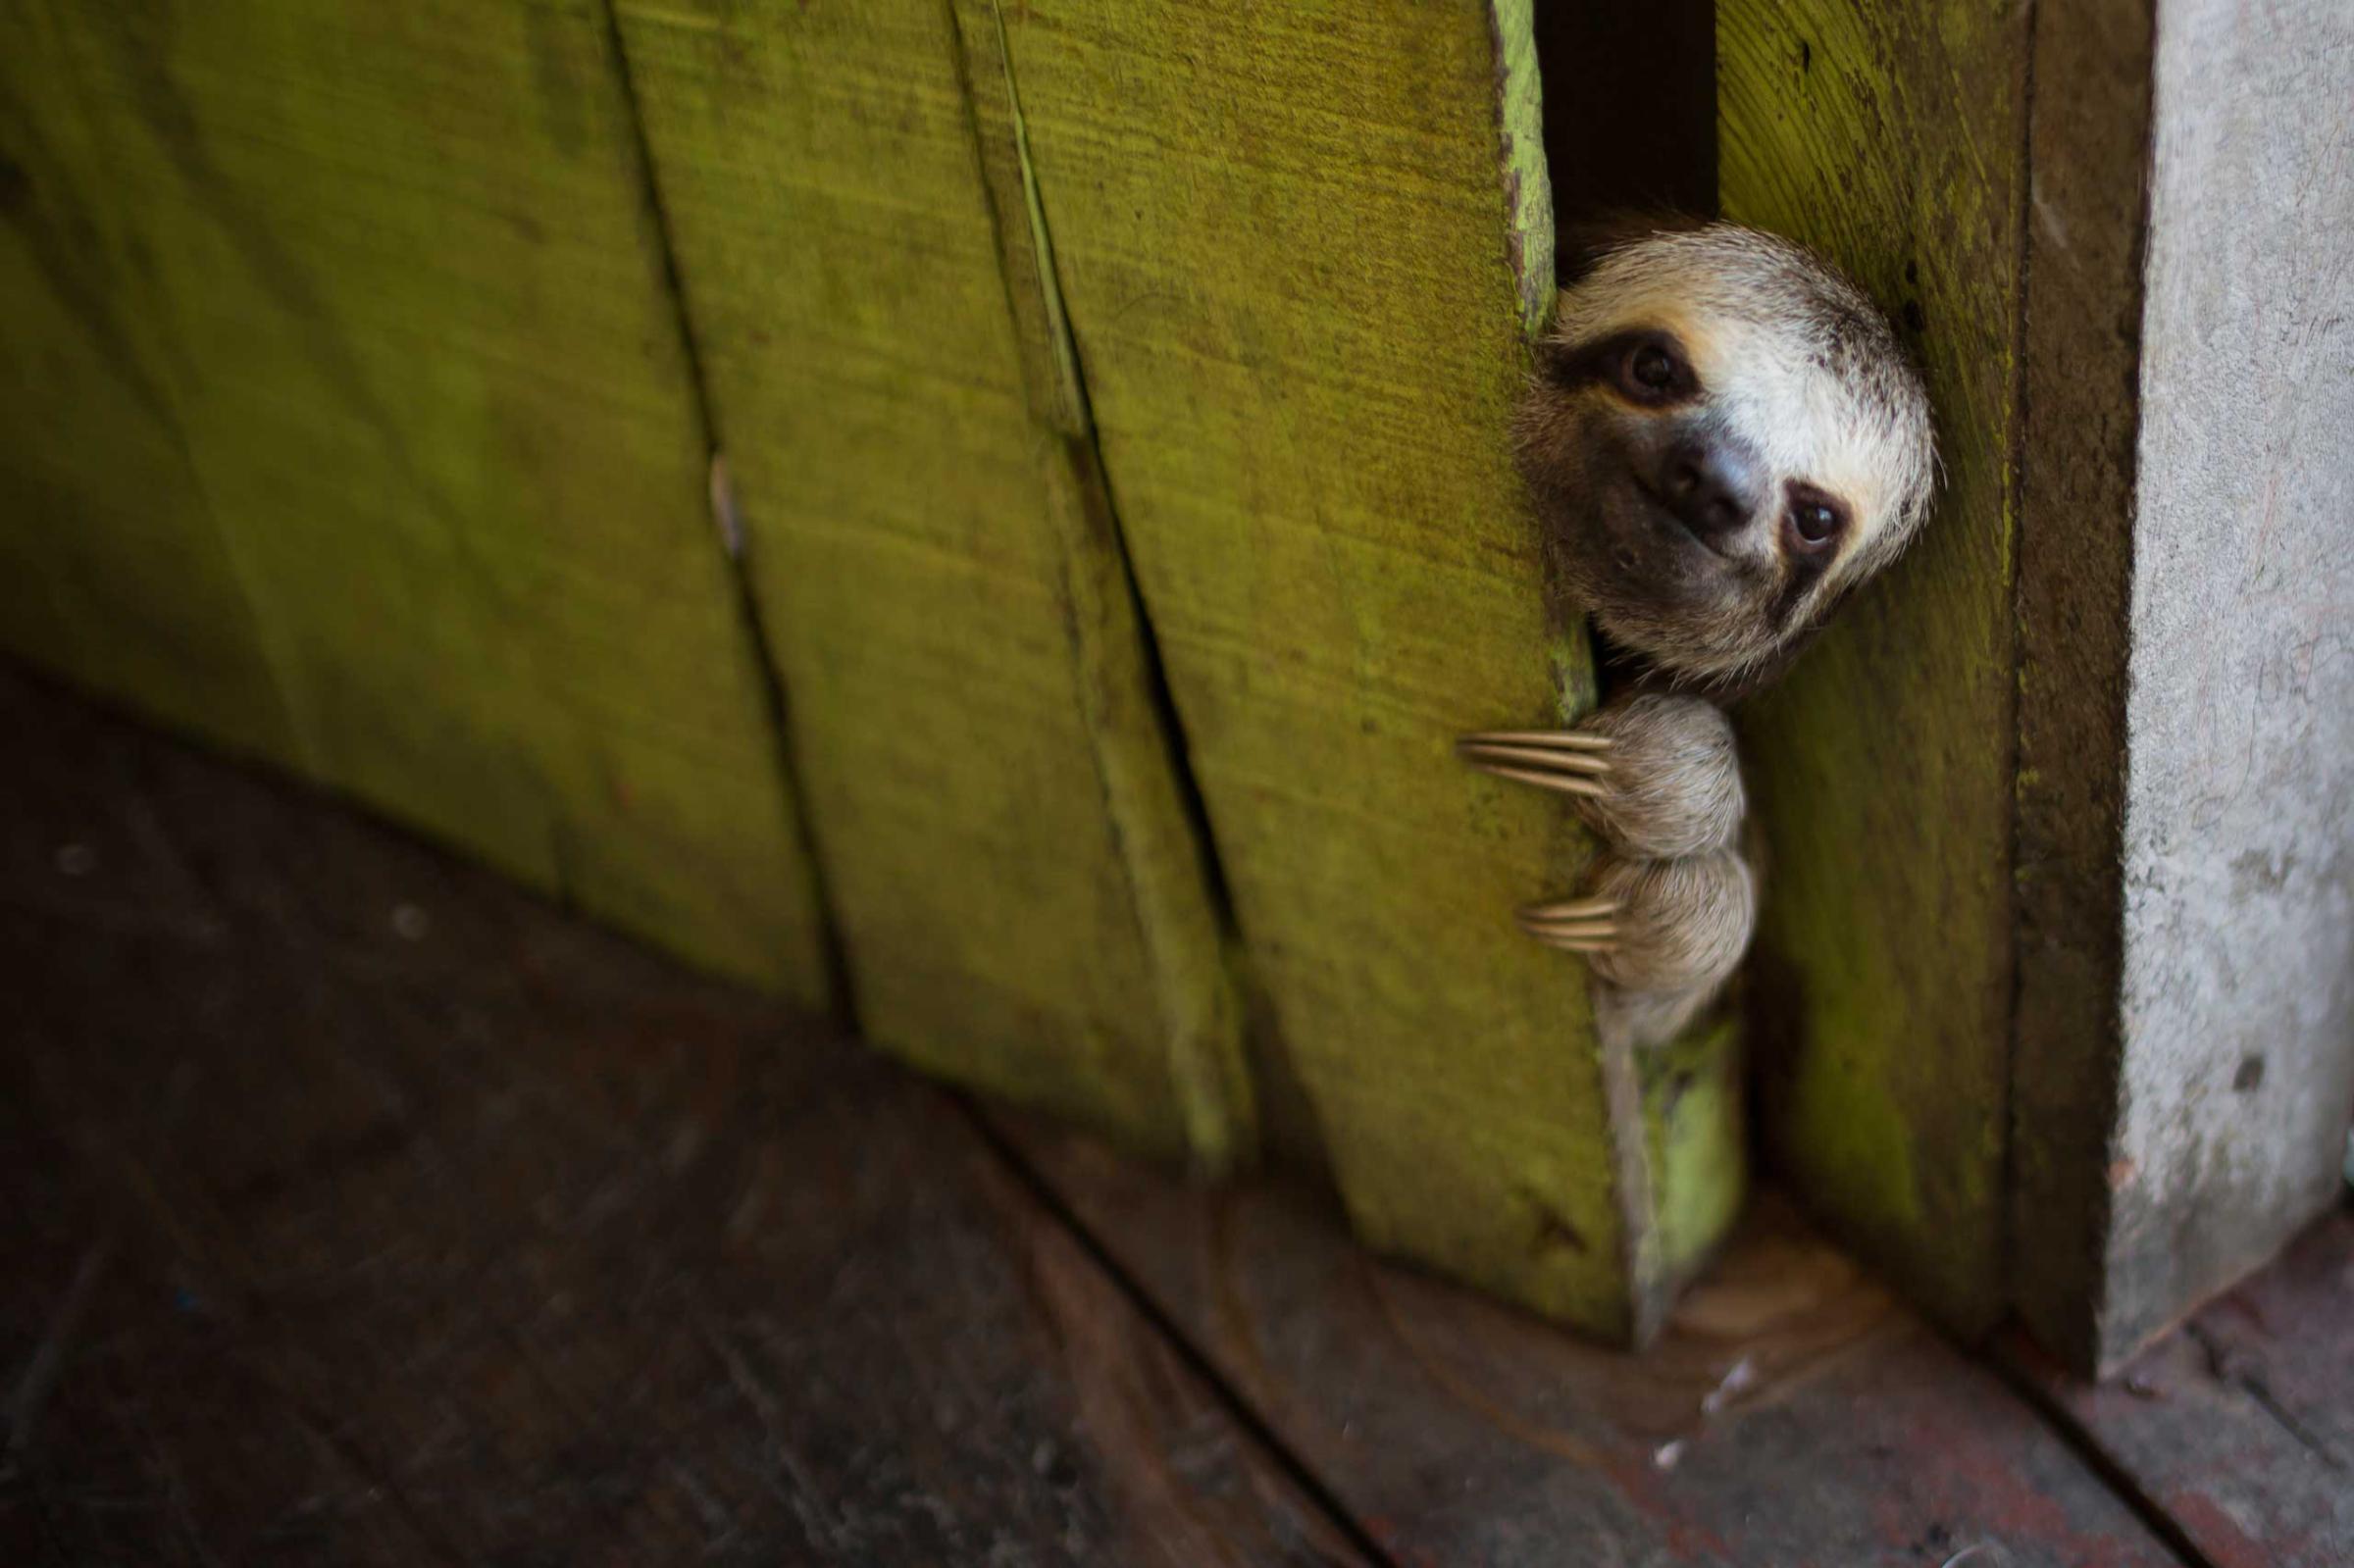 A baby sloth peeks out from behind a door on a floating house near Manaus, Brazil, May 20, 2014.